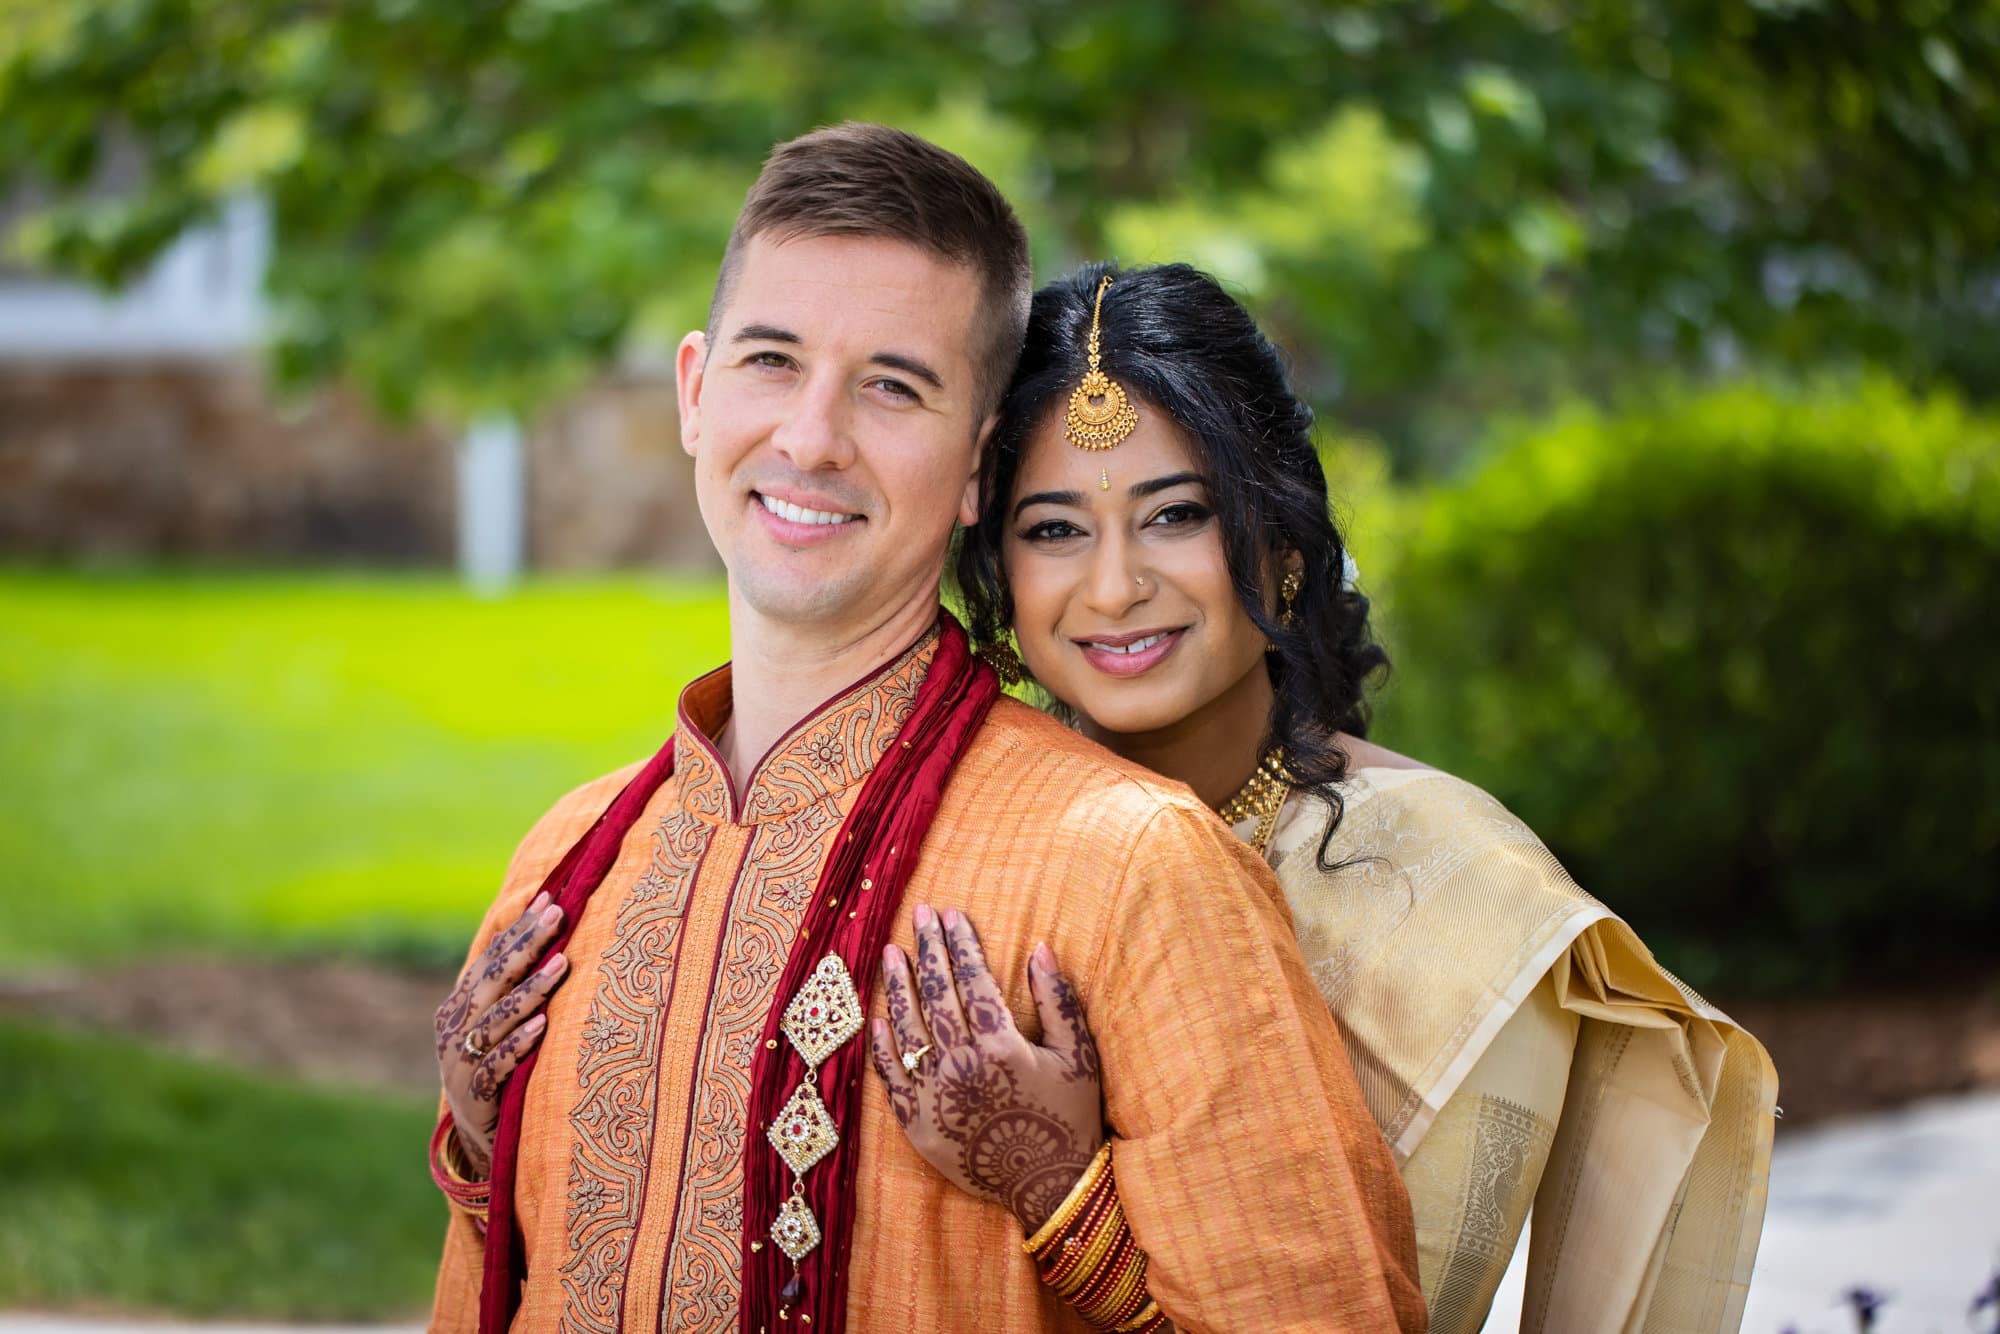 Bride and groom wearing traditional orange and yellow Indian wedding attire pose for their wedding photography at Glenn Oaks Country Club in Des Monies, IA.